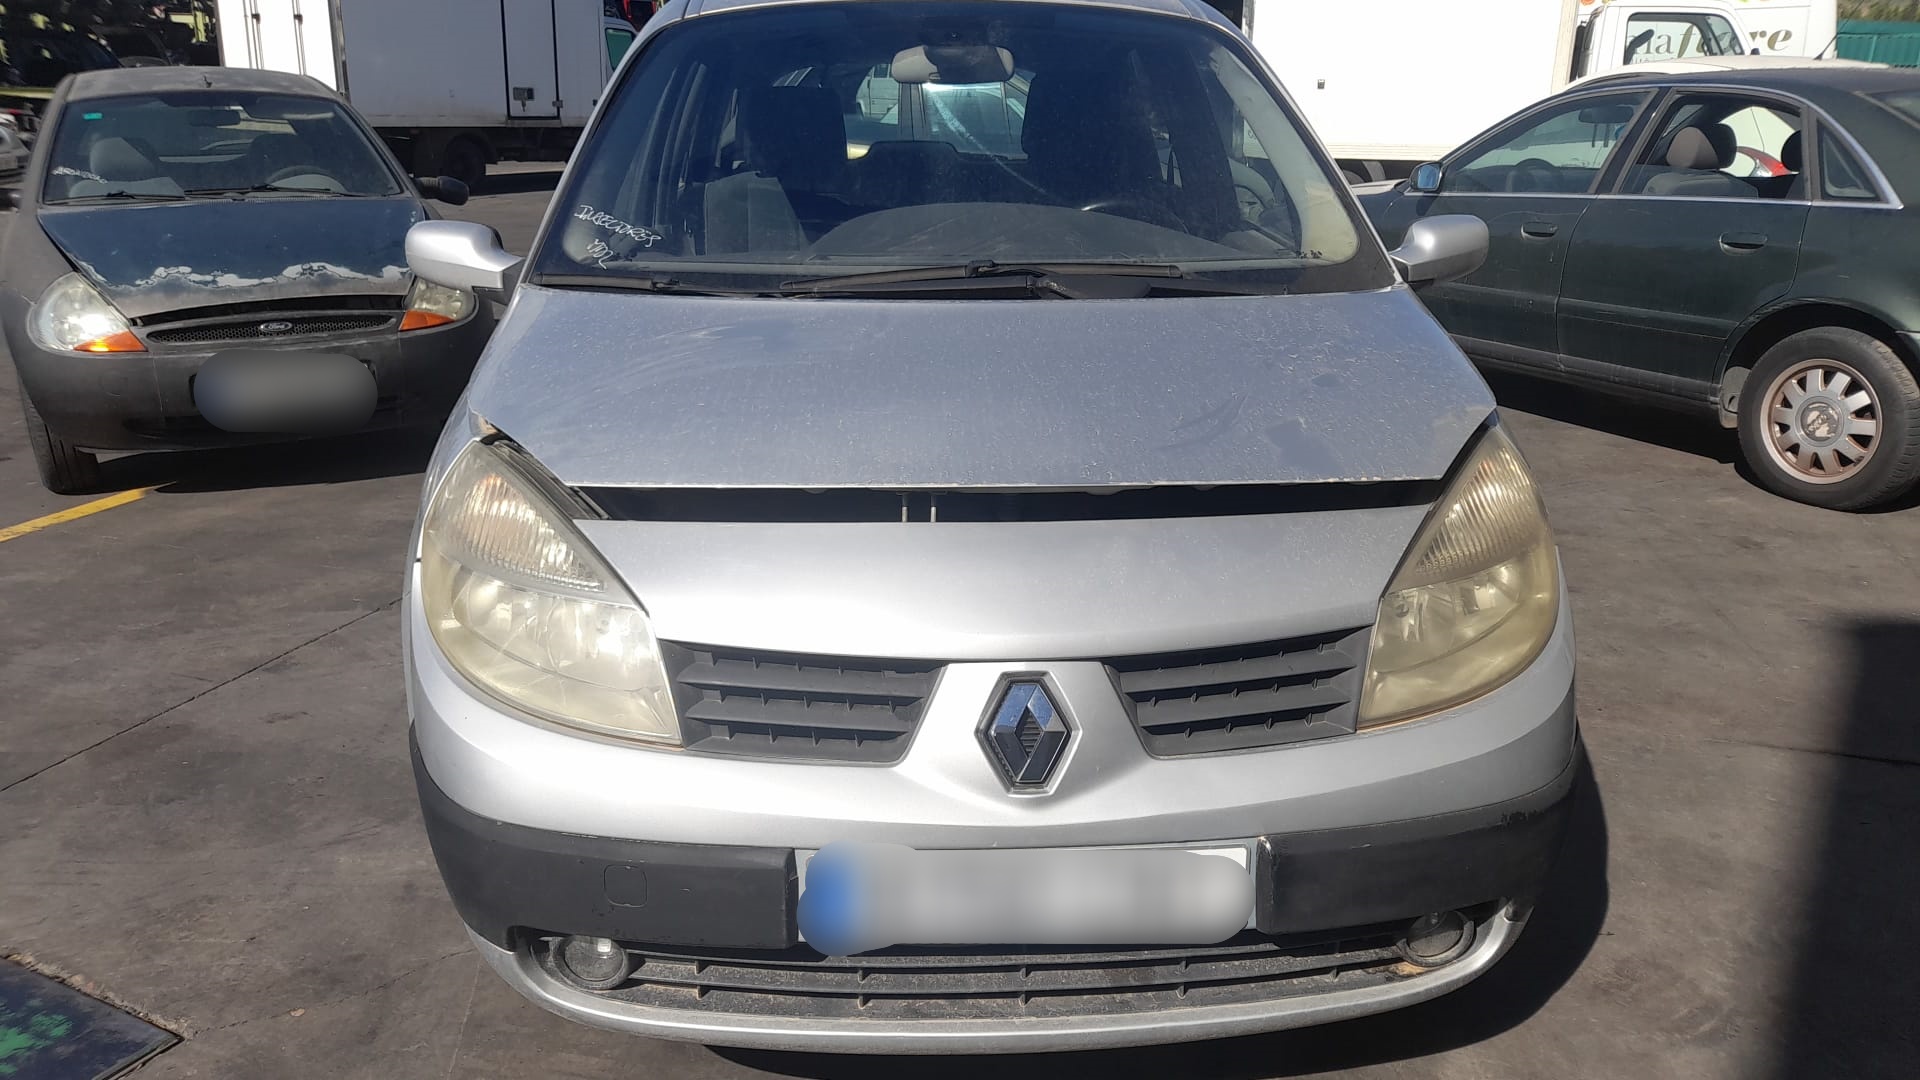 RENAULT Scenic 2 generation (2003-2010) Other Body Parts 8200076256 18640173